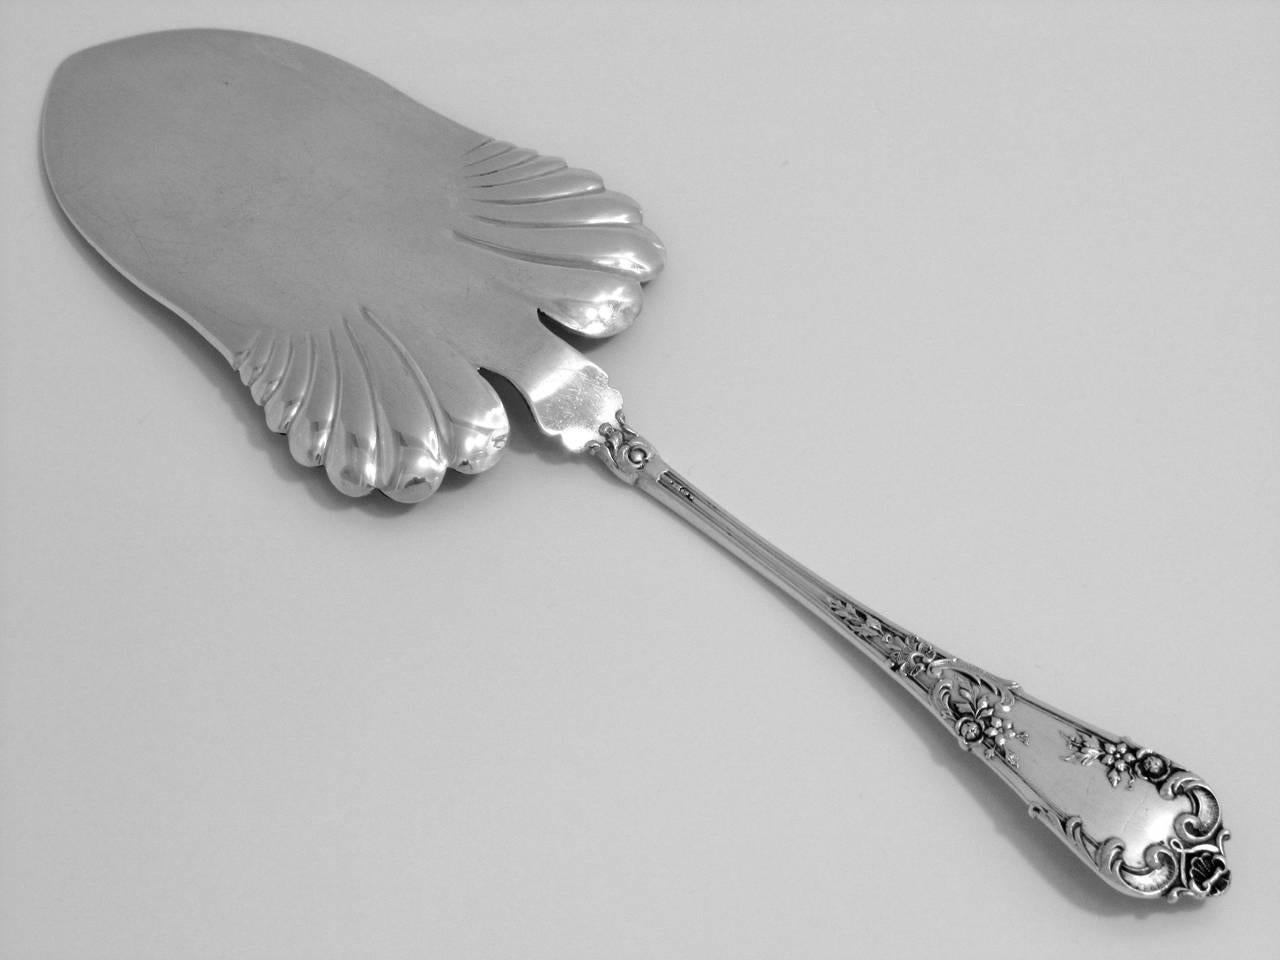 Gorgeous French All Sterling Silver Pie Pastry Fish Server Fish-Shaped Blade In Good Condition For Sale In TRIAIZE, PAYS DE LOIRE